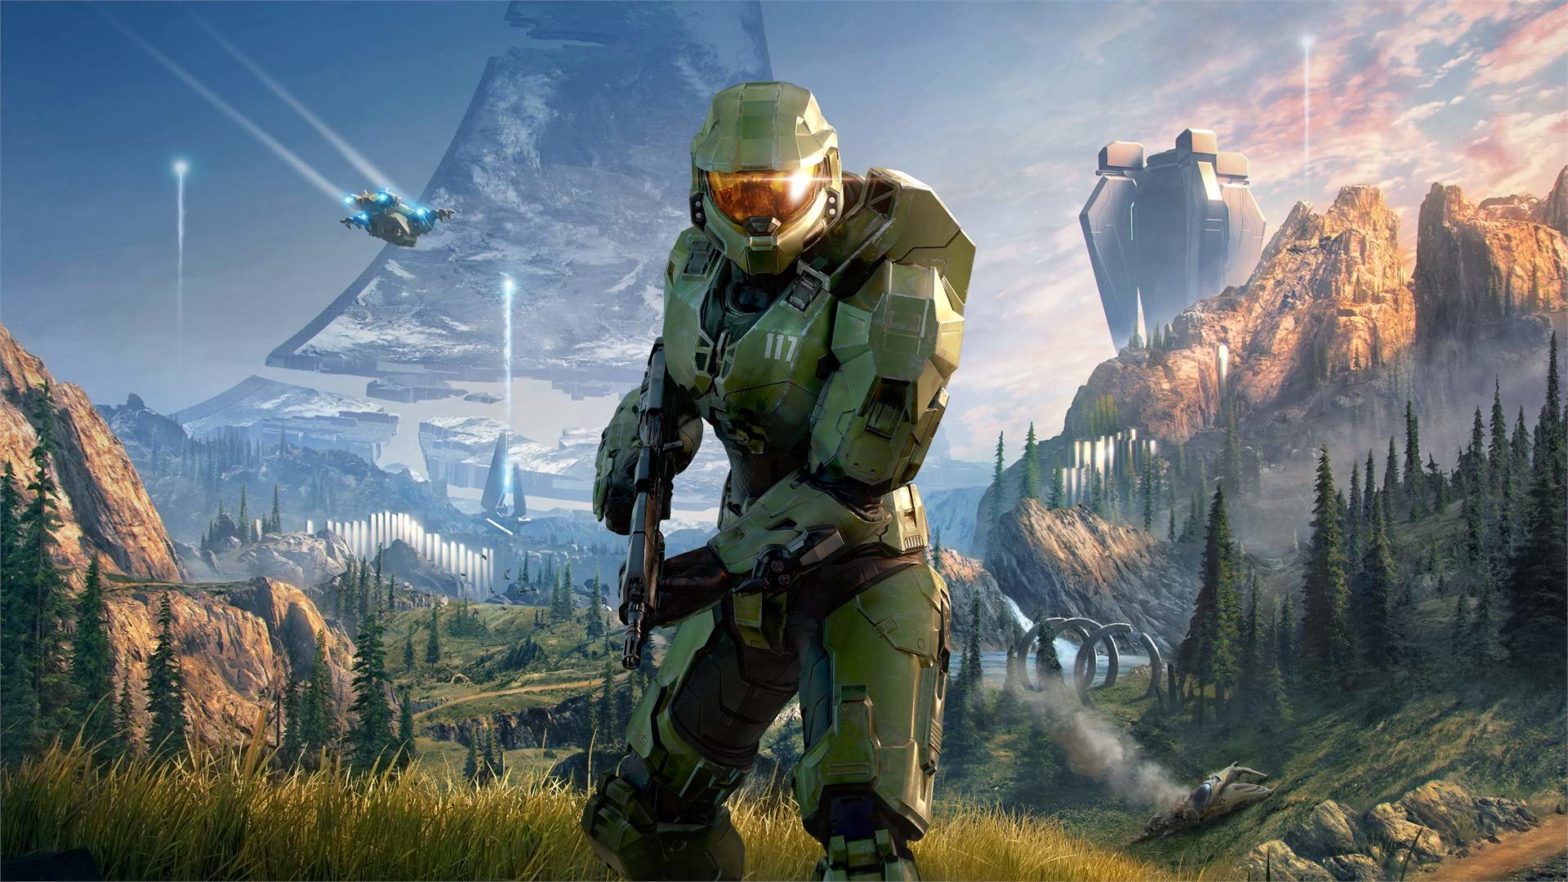 Halo Infinite (Campaign) Is Now Available For PC, Xbox One, And Xbox Series X|S